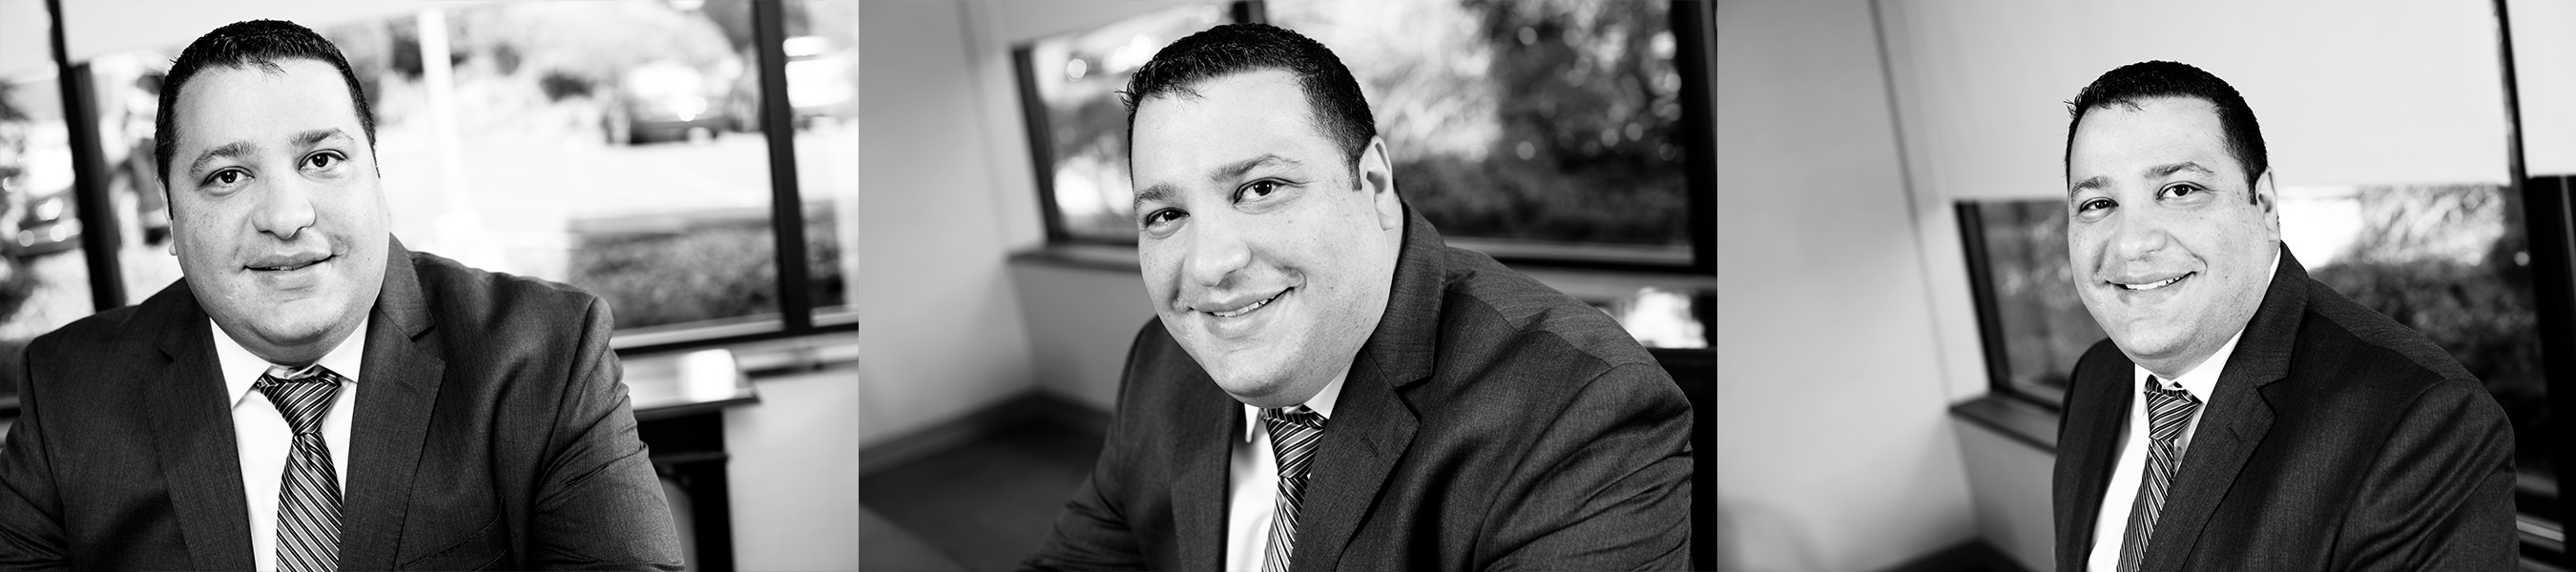 OUR ATTORNEYS: Angelo M. Bianco – Senior Litigation Counsel